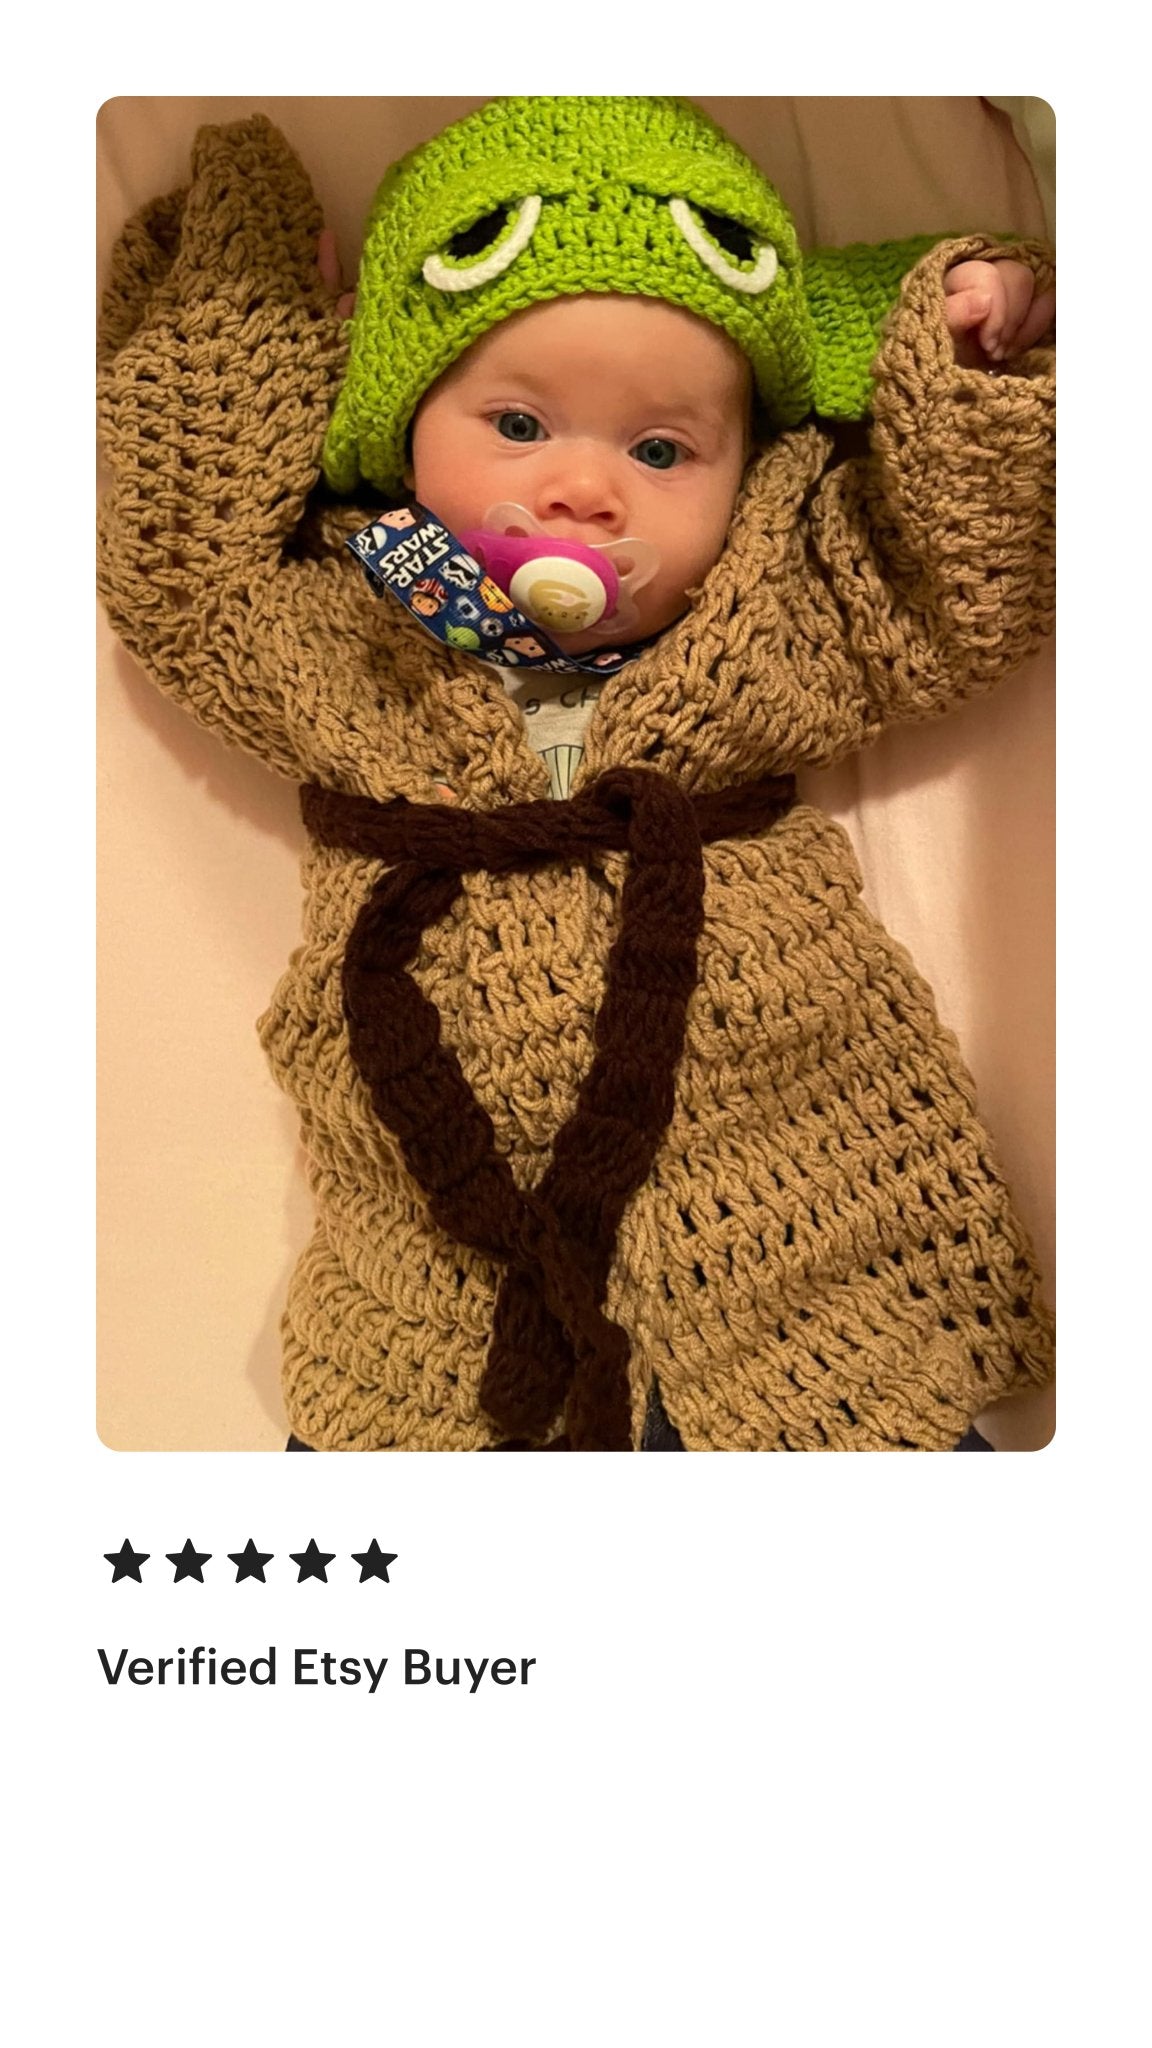 Baby Yoda Costume: Perfect for First Halloween - High Quality Infant Outfit